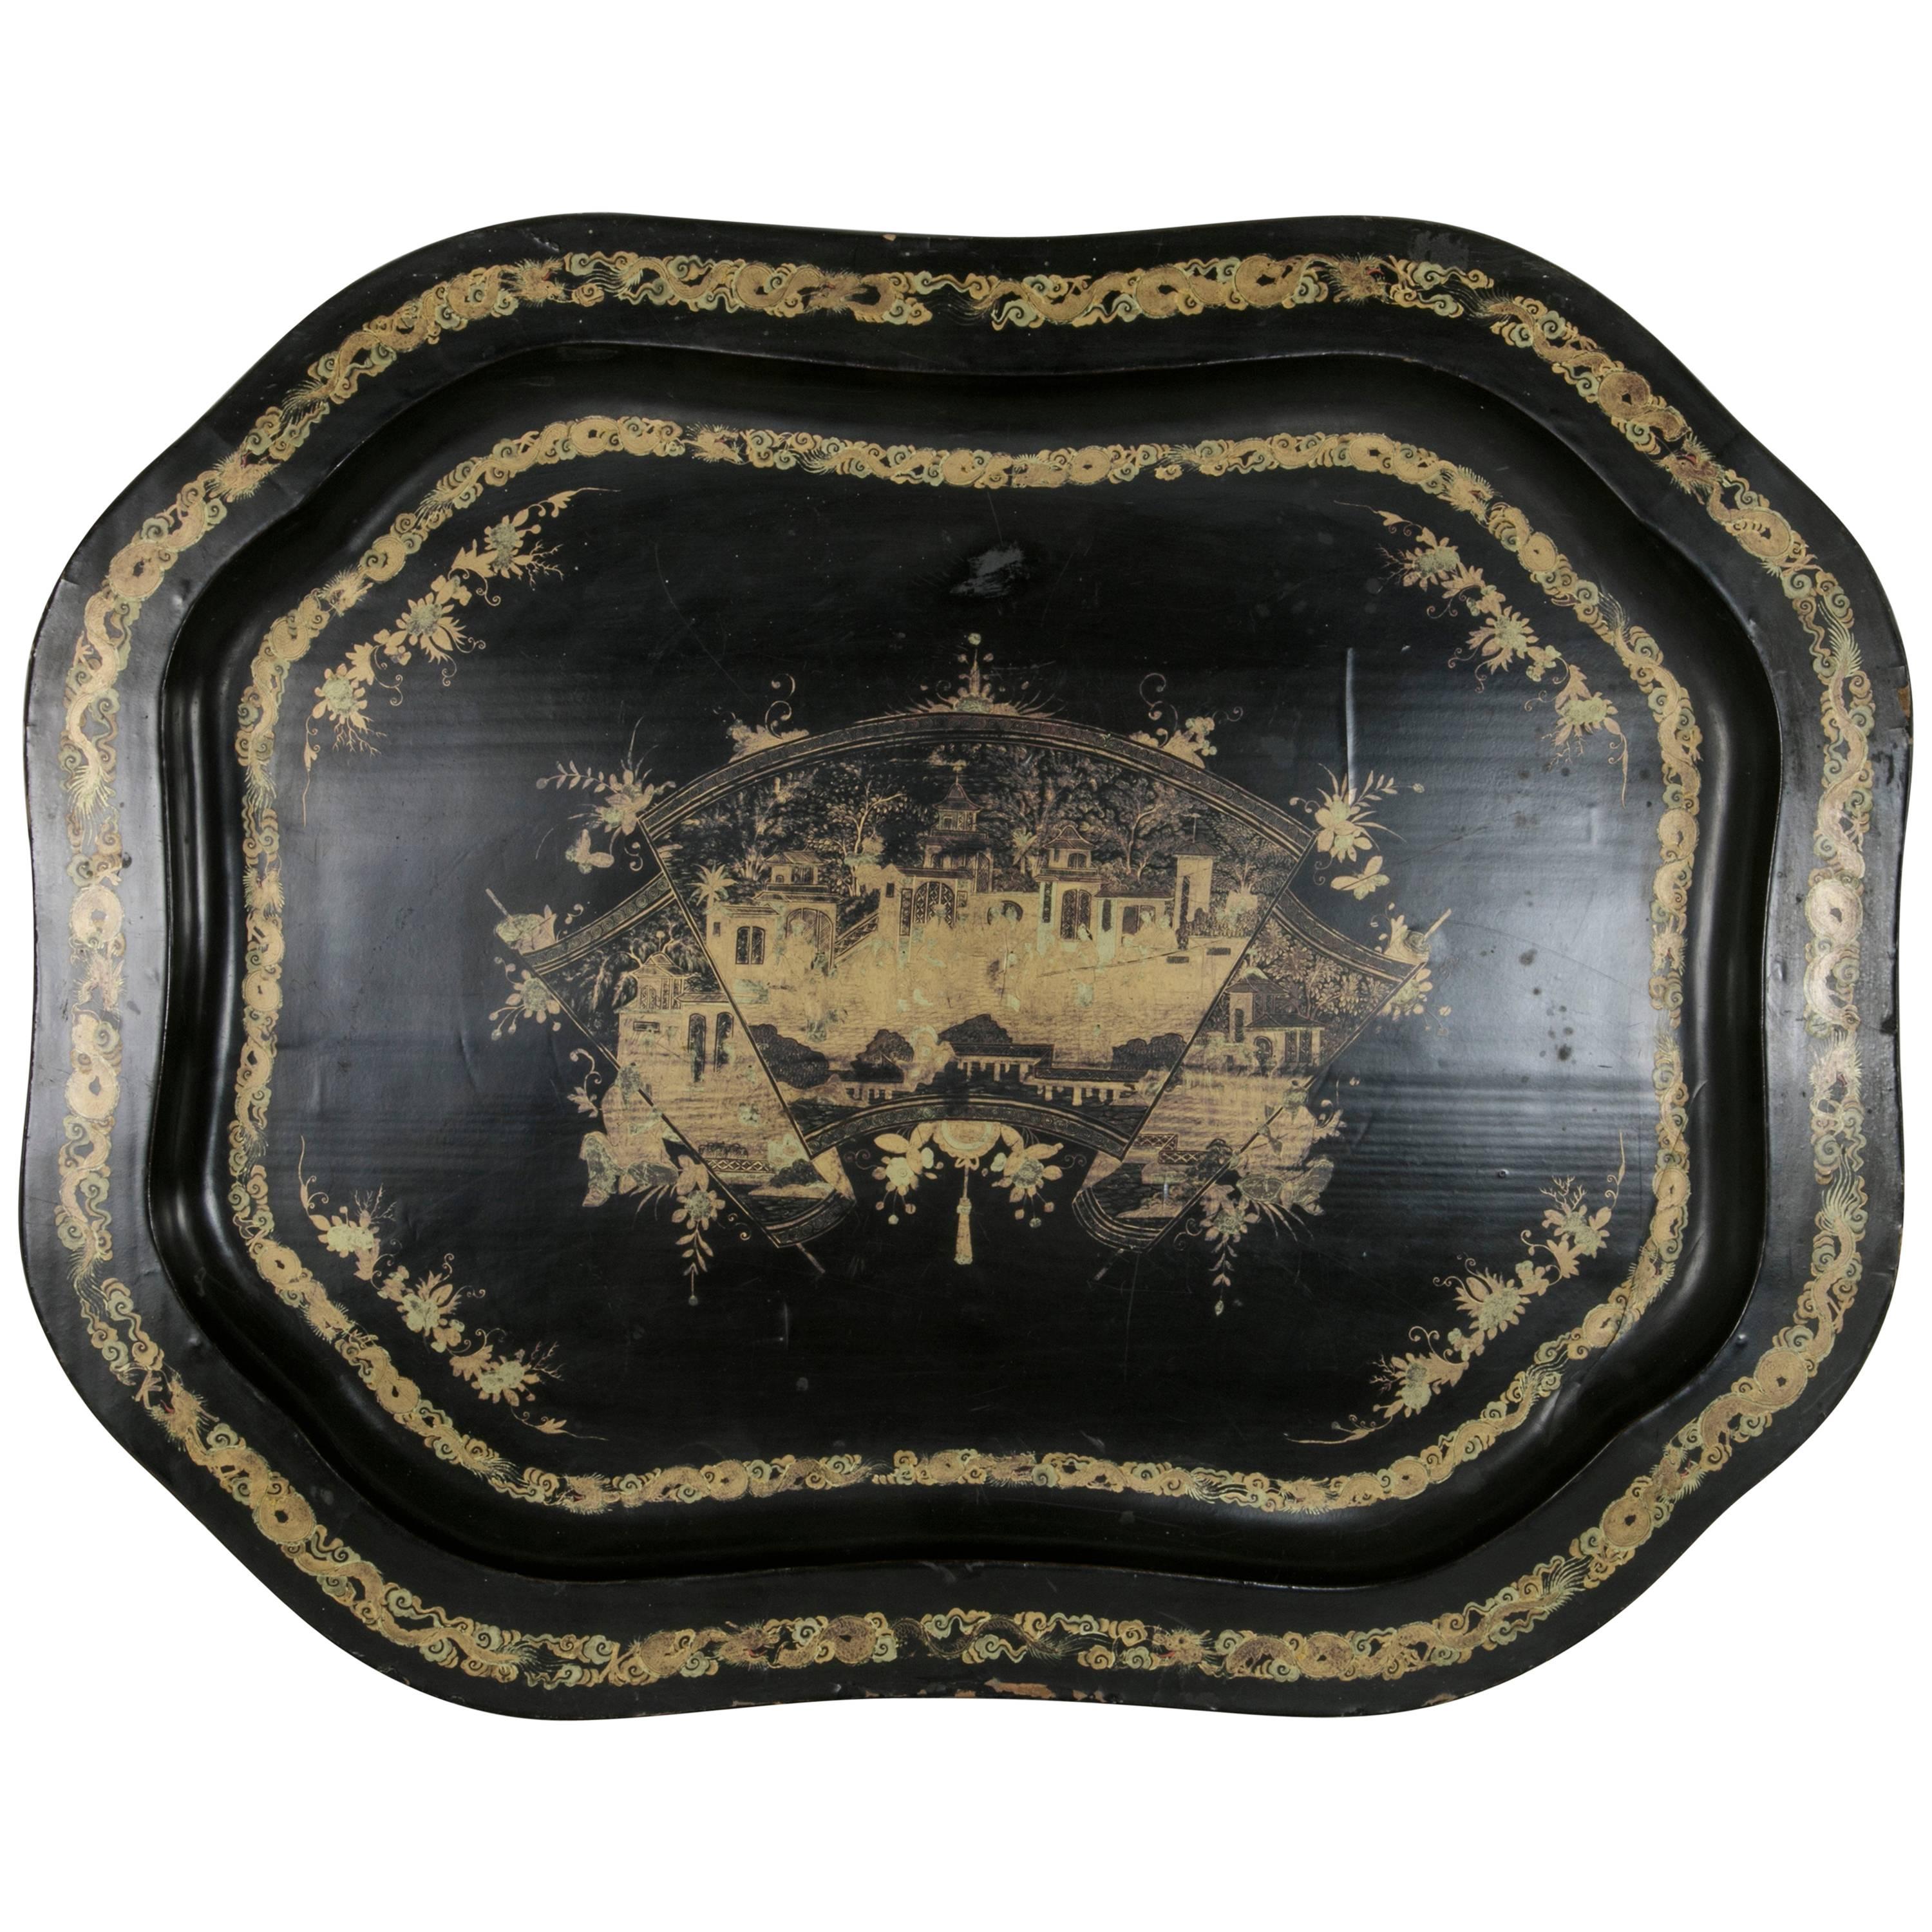 Large 19th Century Chinese Export Black Lacquer Wooden Serving Tray